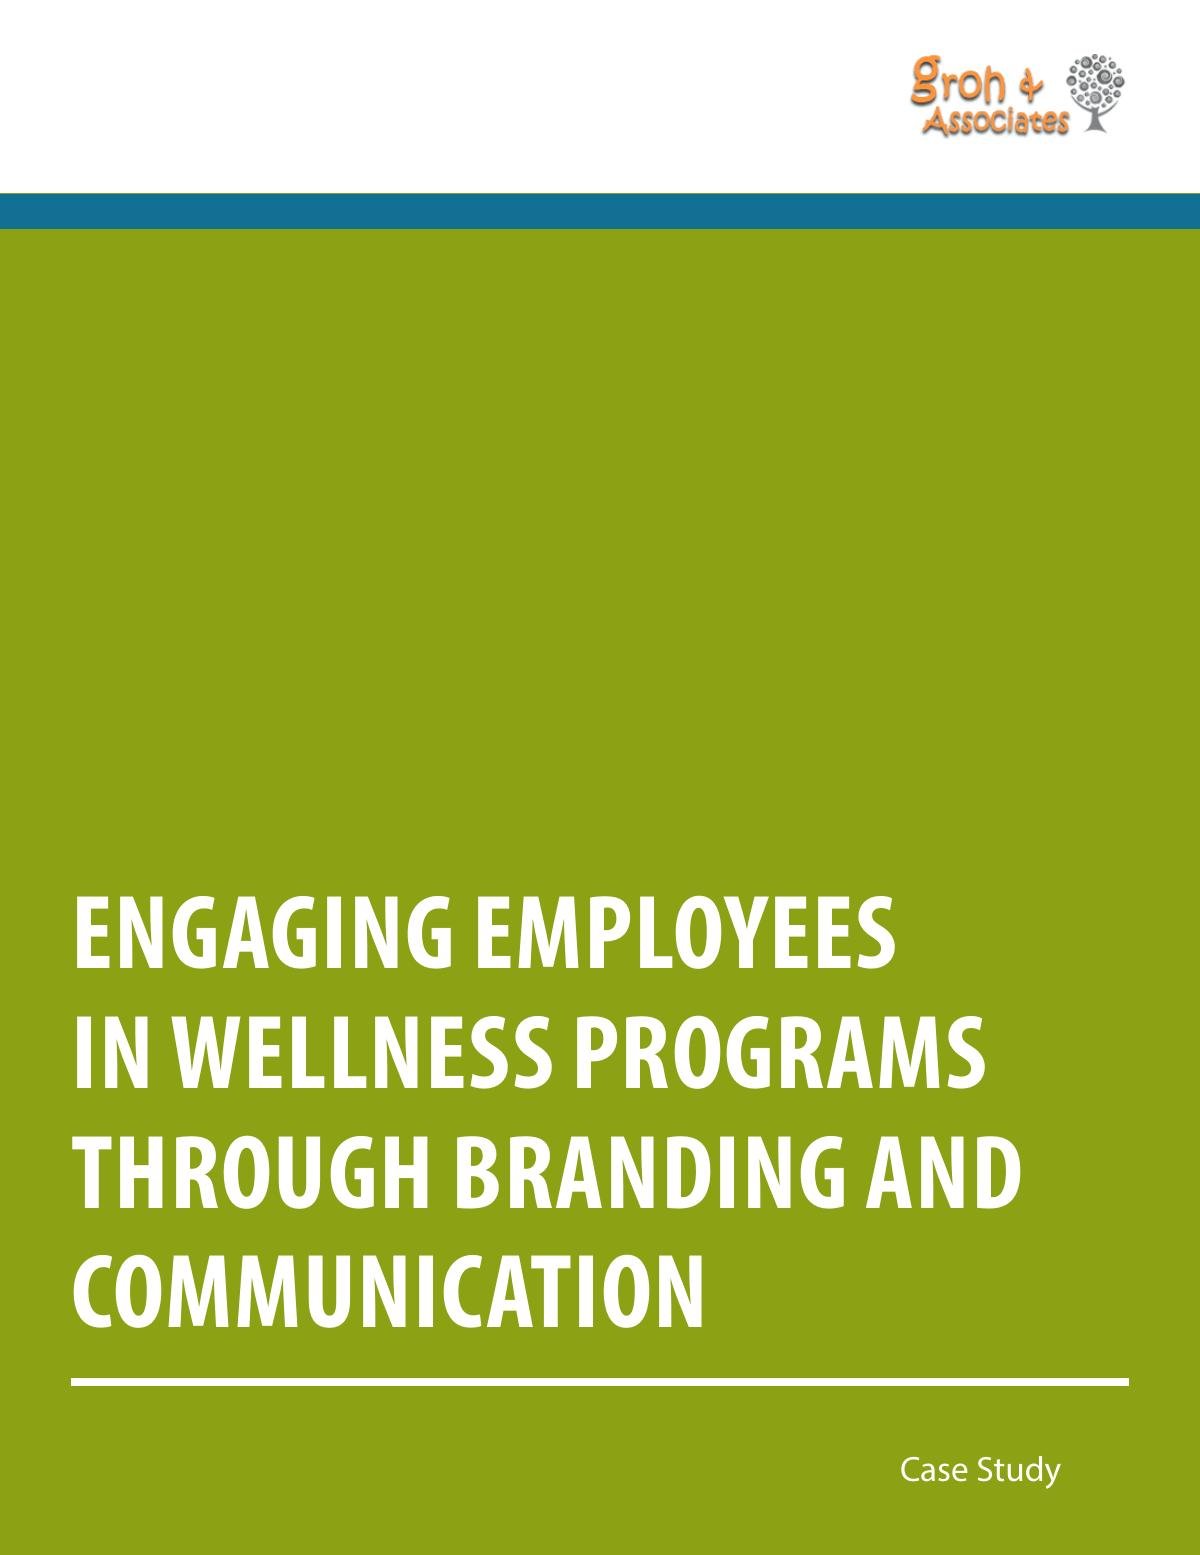 Engaging Employees in Wellness Programs through Branding and Communication